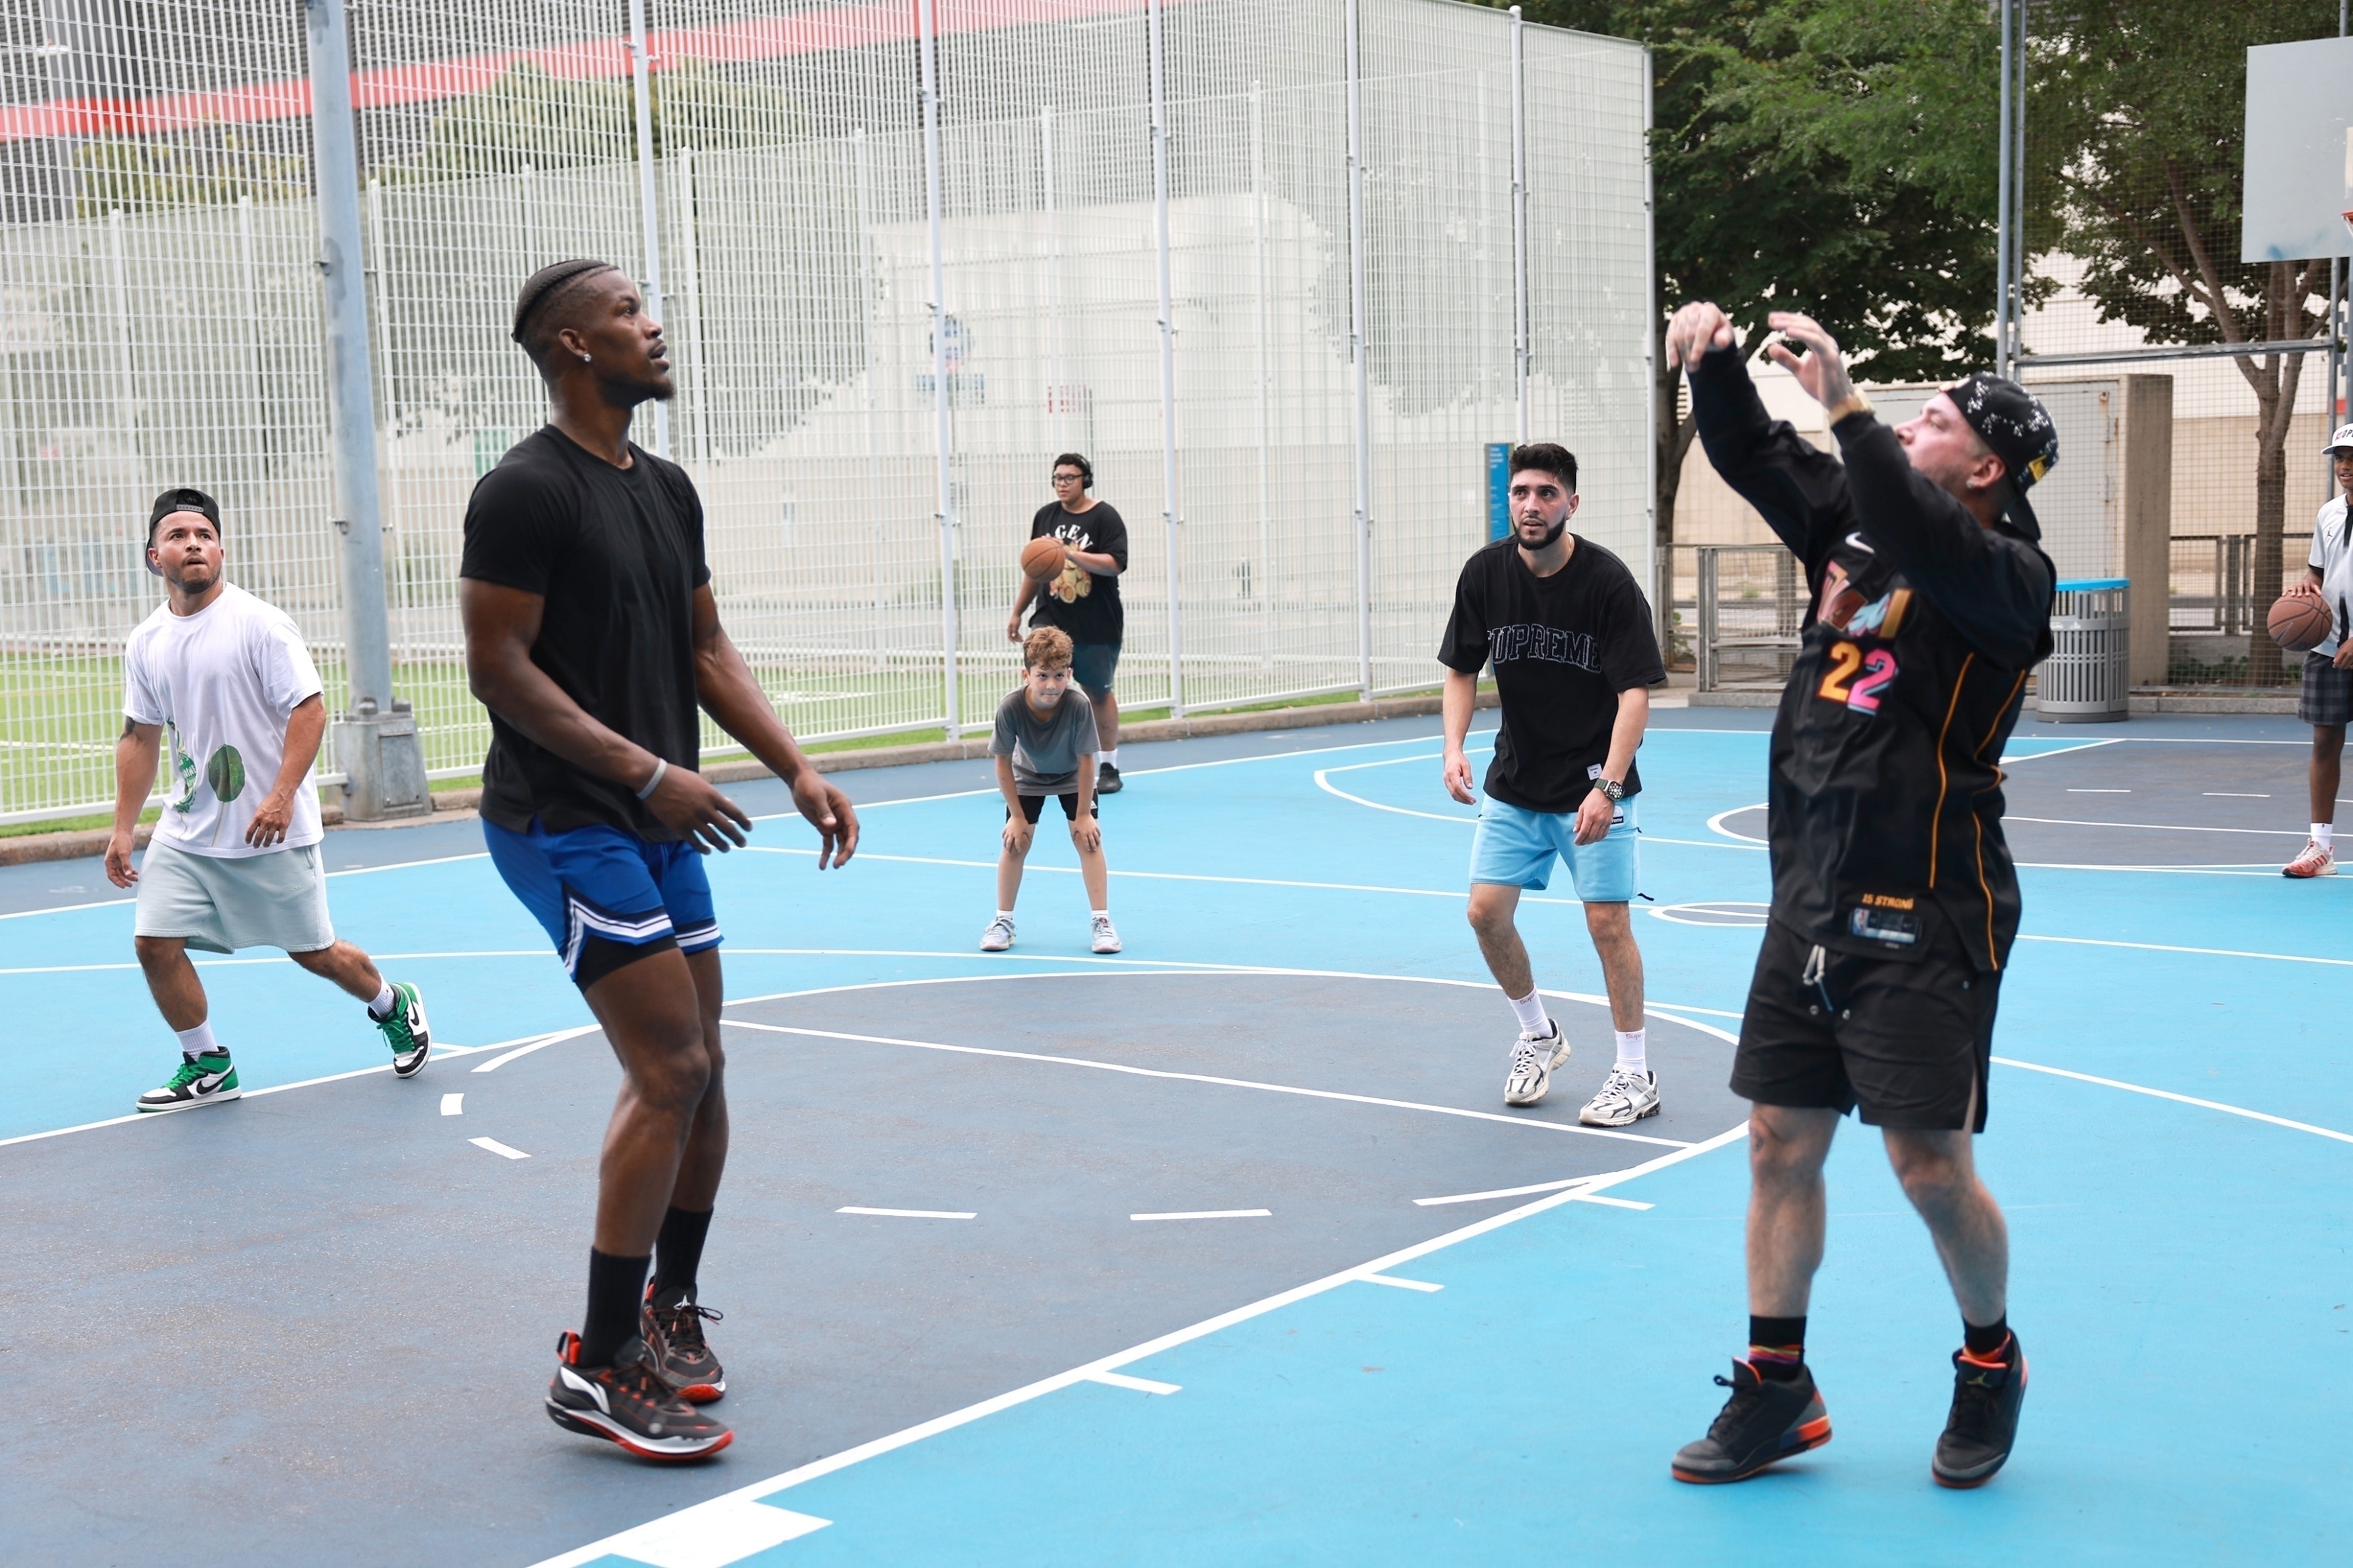 J.Balvin wears his unreleased Air Jordan 3 "Rio" shoes while playing basketball in New York with Jimmy Butler